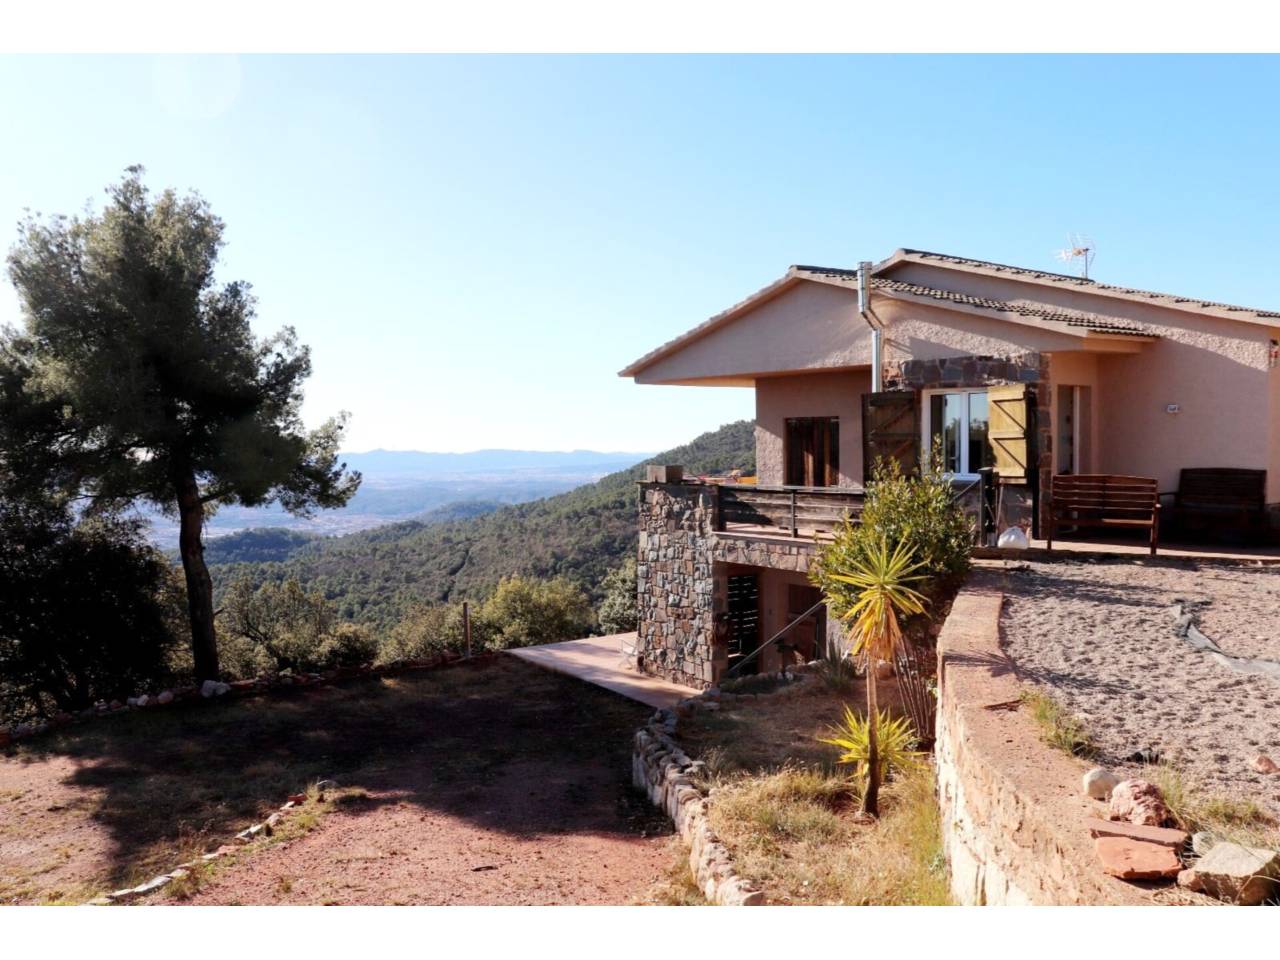 COZY HOUSE FOR SALE LOCATED IN URB EL FARELL IN THE MIDDLE OF NATURE.